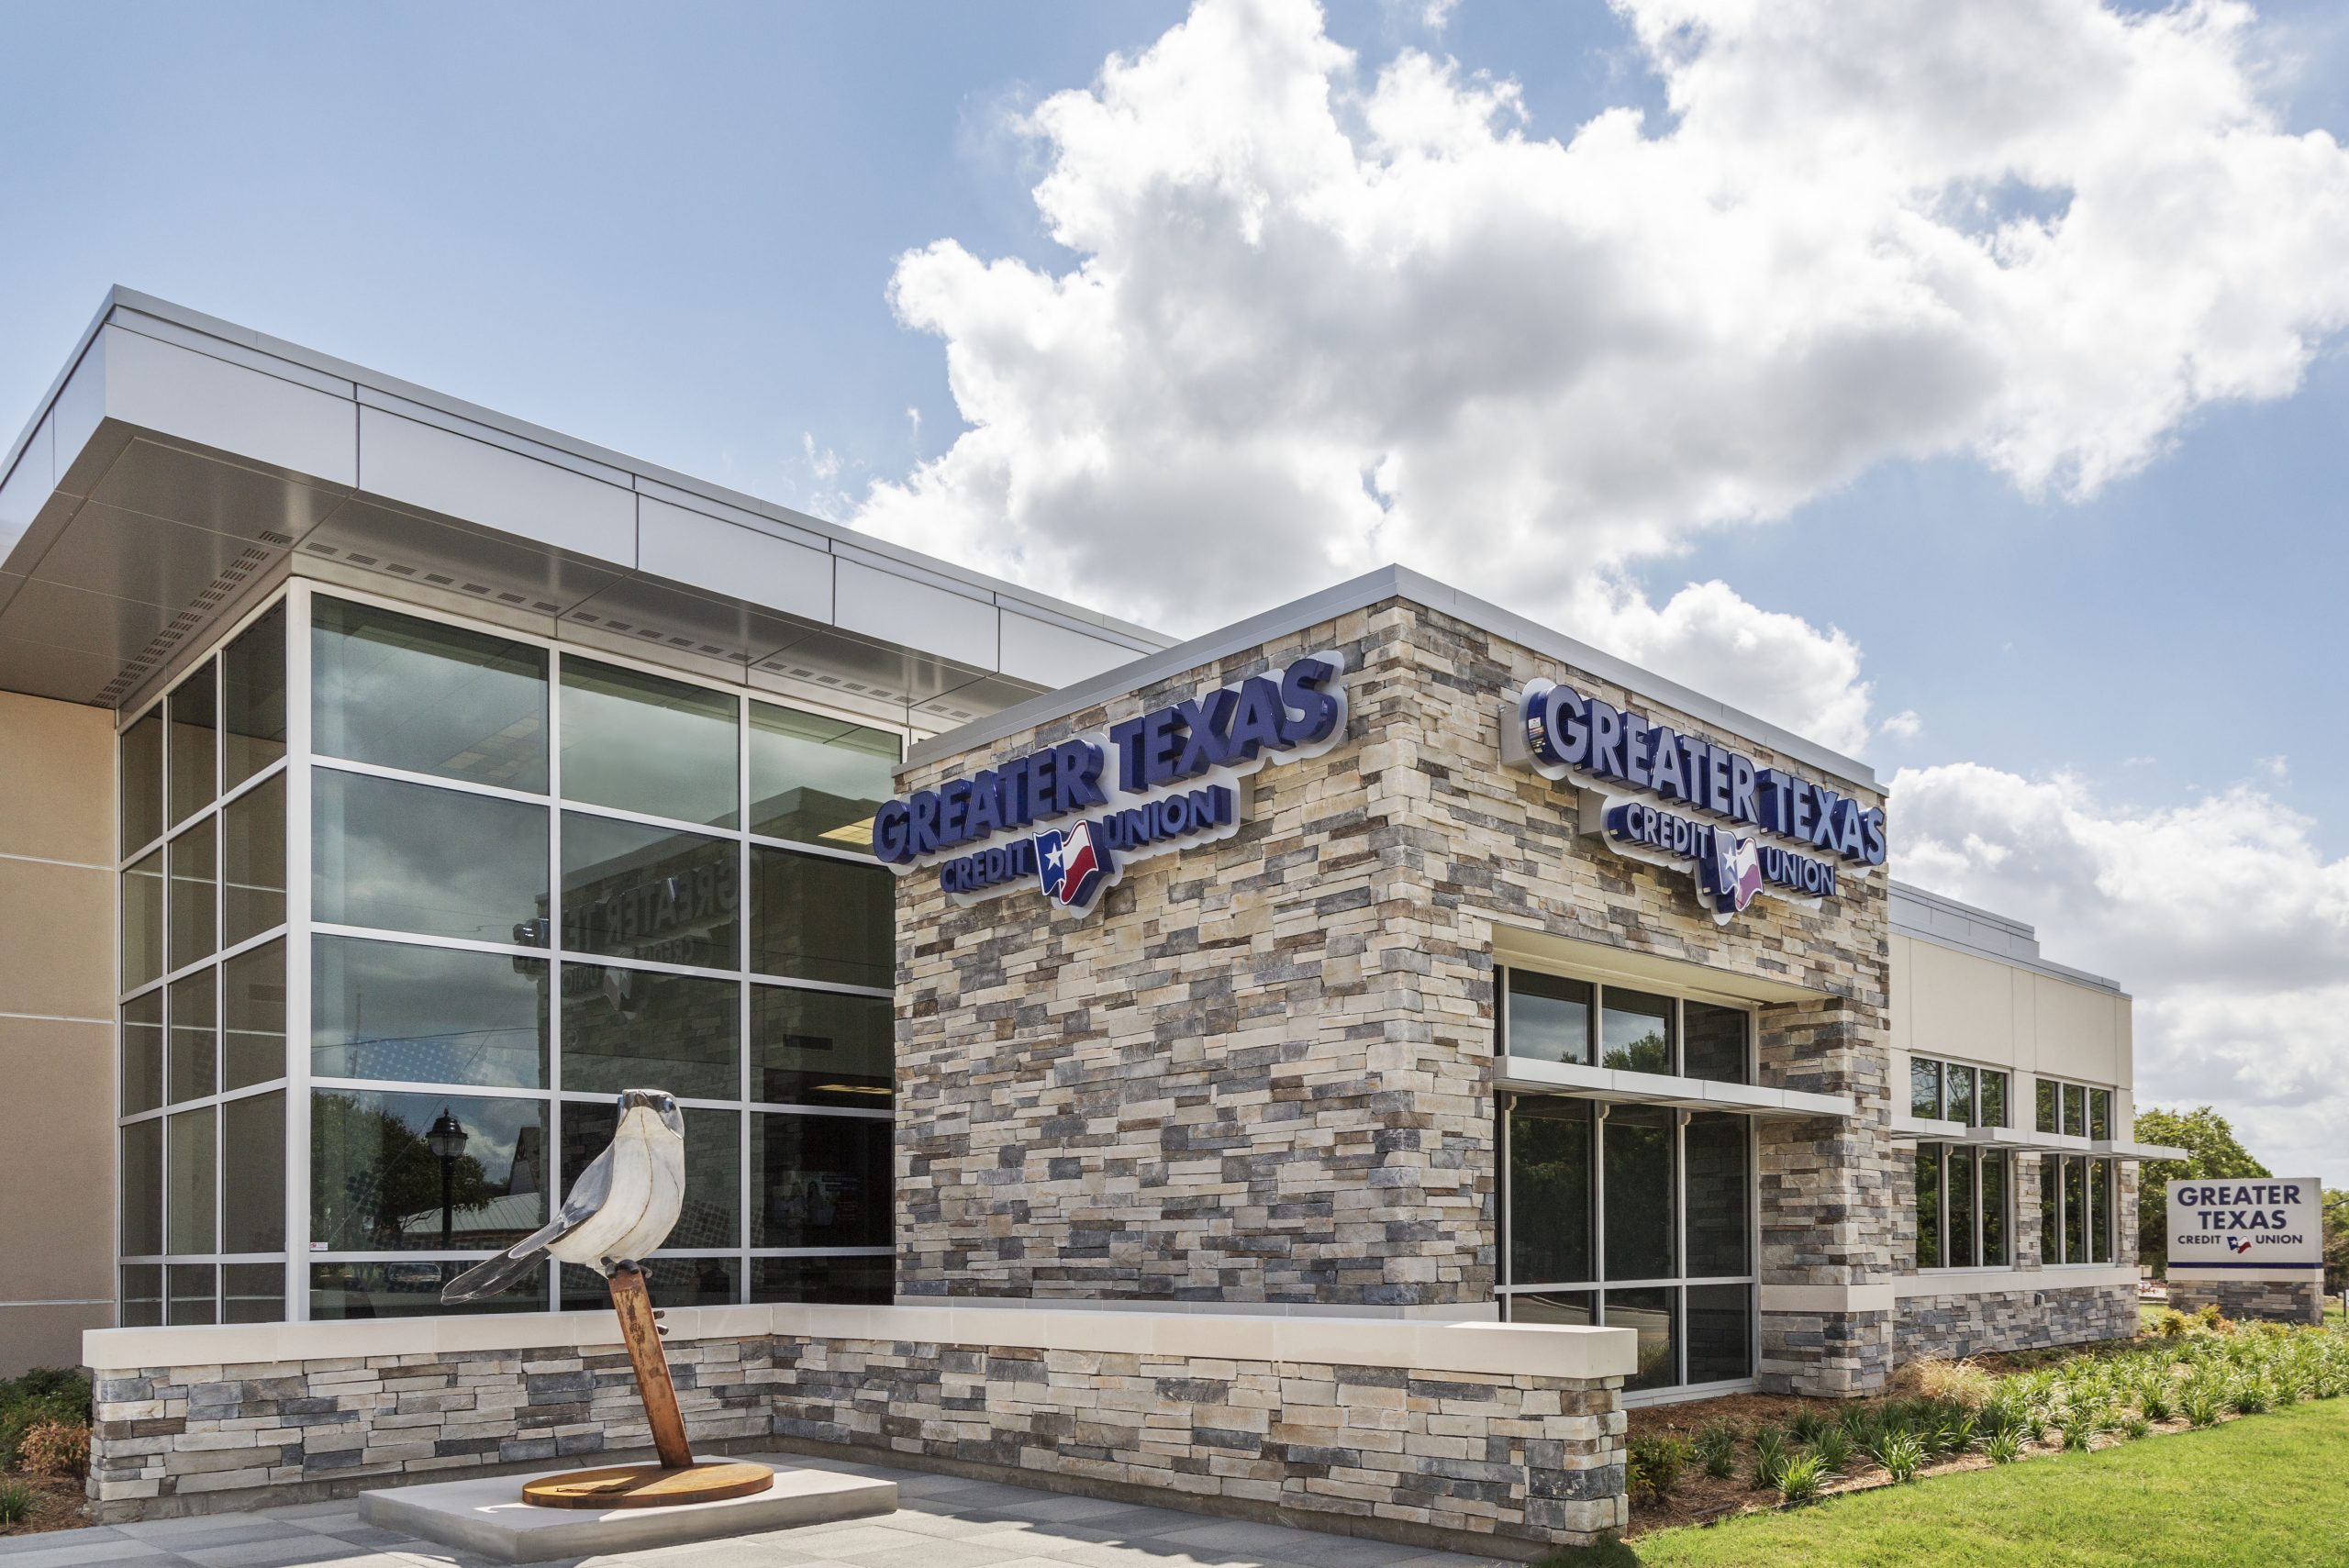 Picture of Greater Texas Credit Union and the steel sculpture.